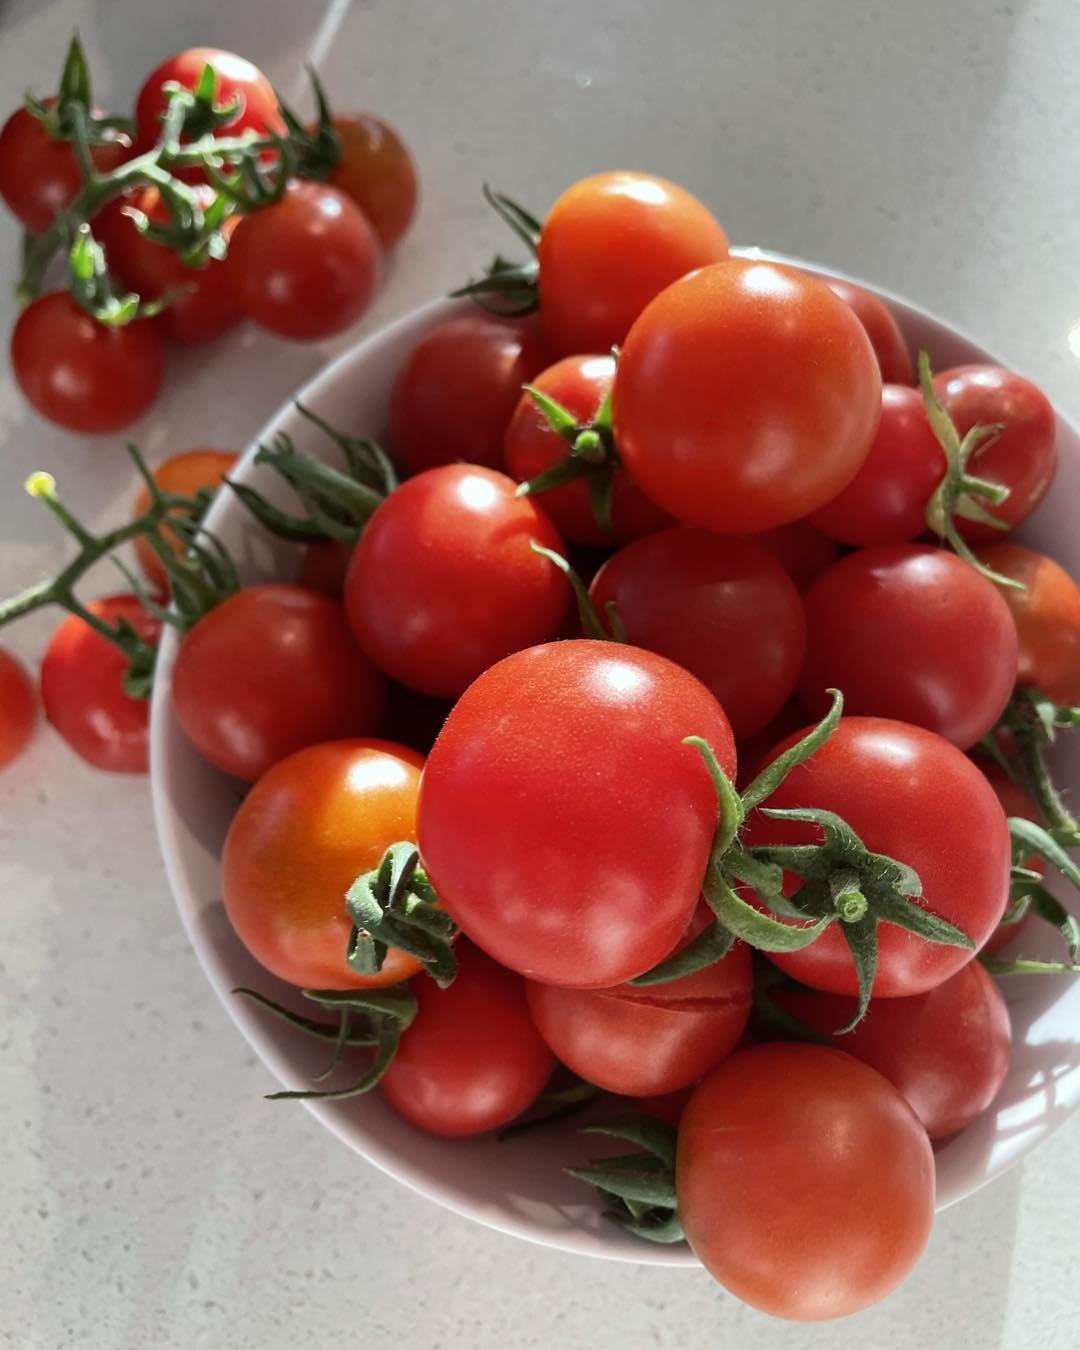 🍅 Show us your tomatoes! 🍅

Now that we have had some warmer days (and with the benefit of lots of rain) tomato season is in full swing! 

We would love to see some pictures of the tomatoes you are growing at your place. Pop a photo in the comments